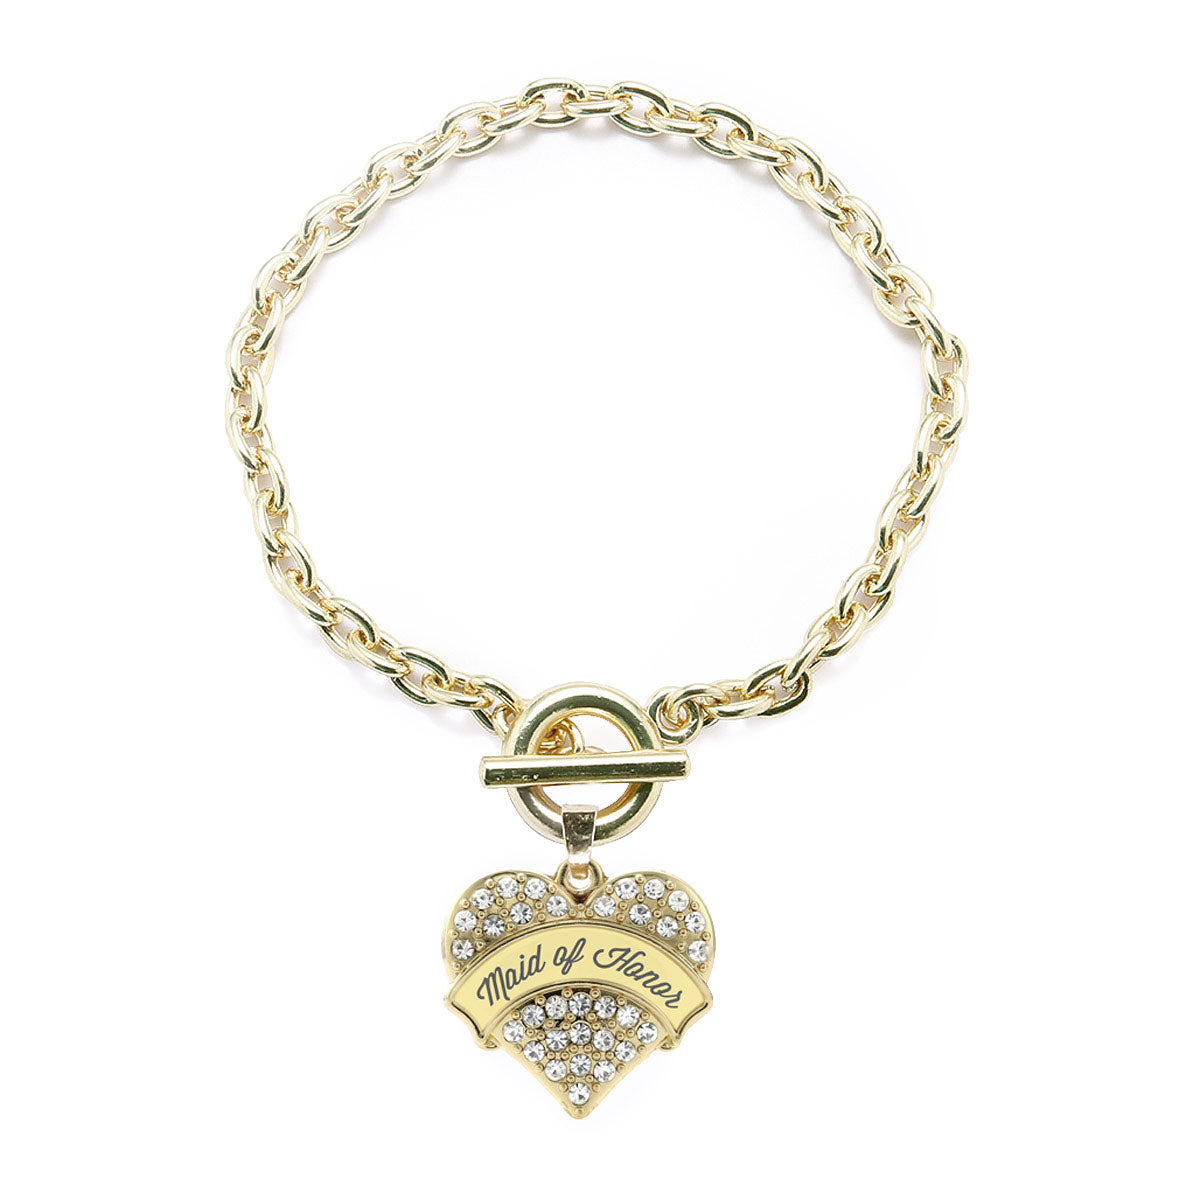 Gold Cream Maid of Honor Pave Heart Charm Toggle Bracelet